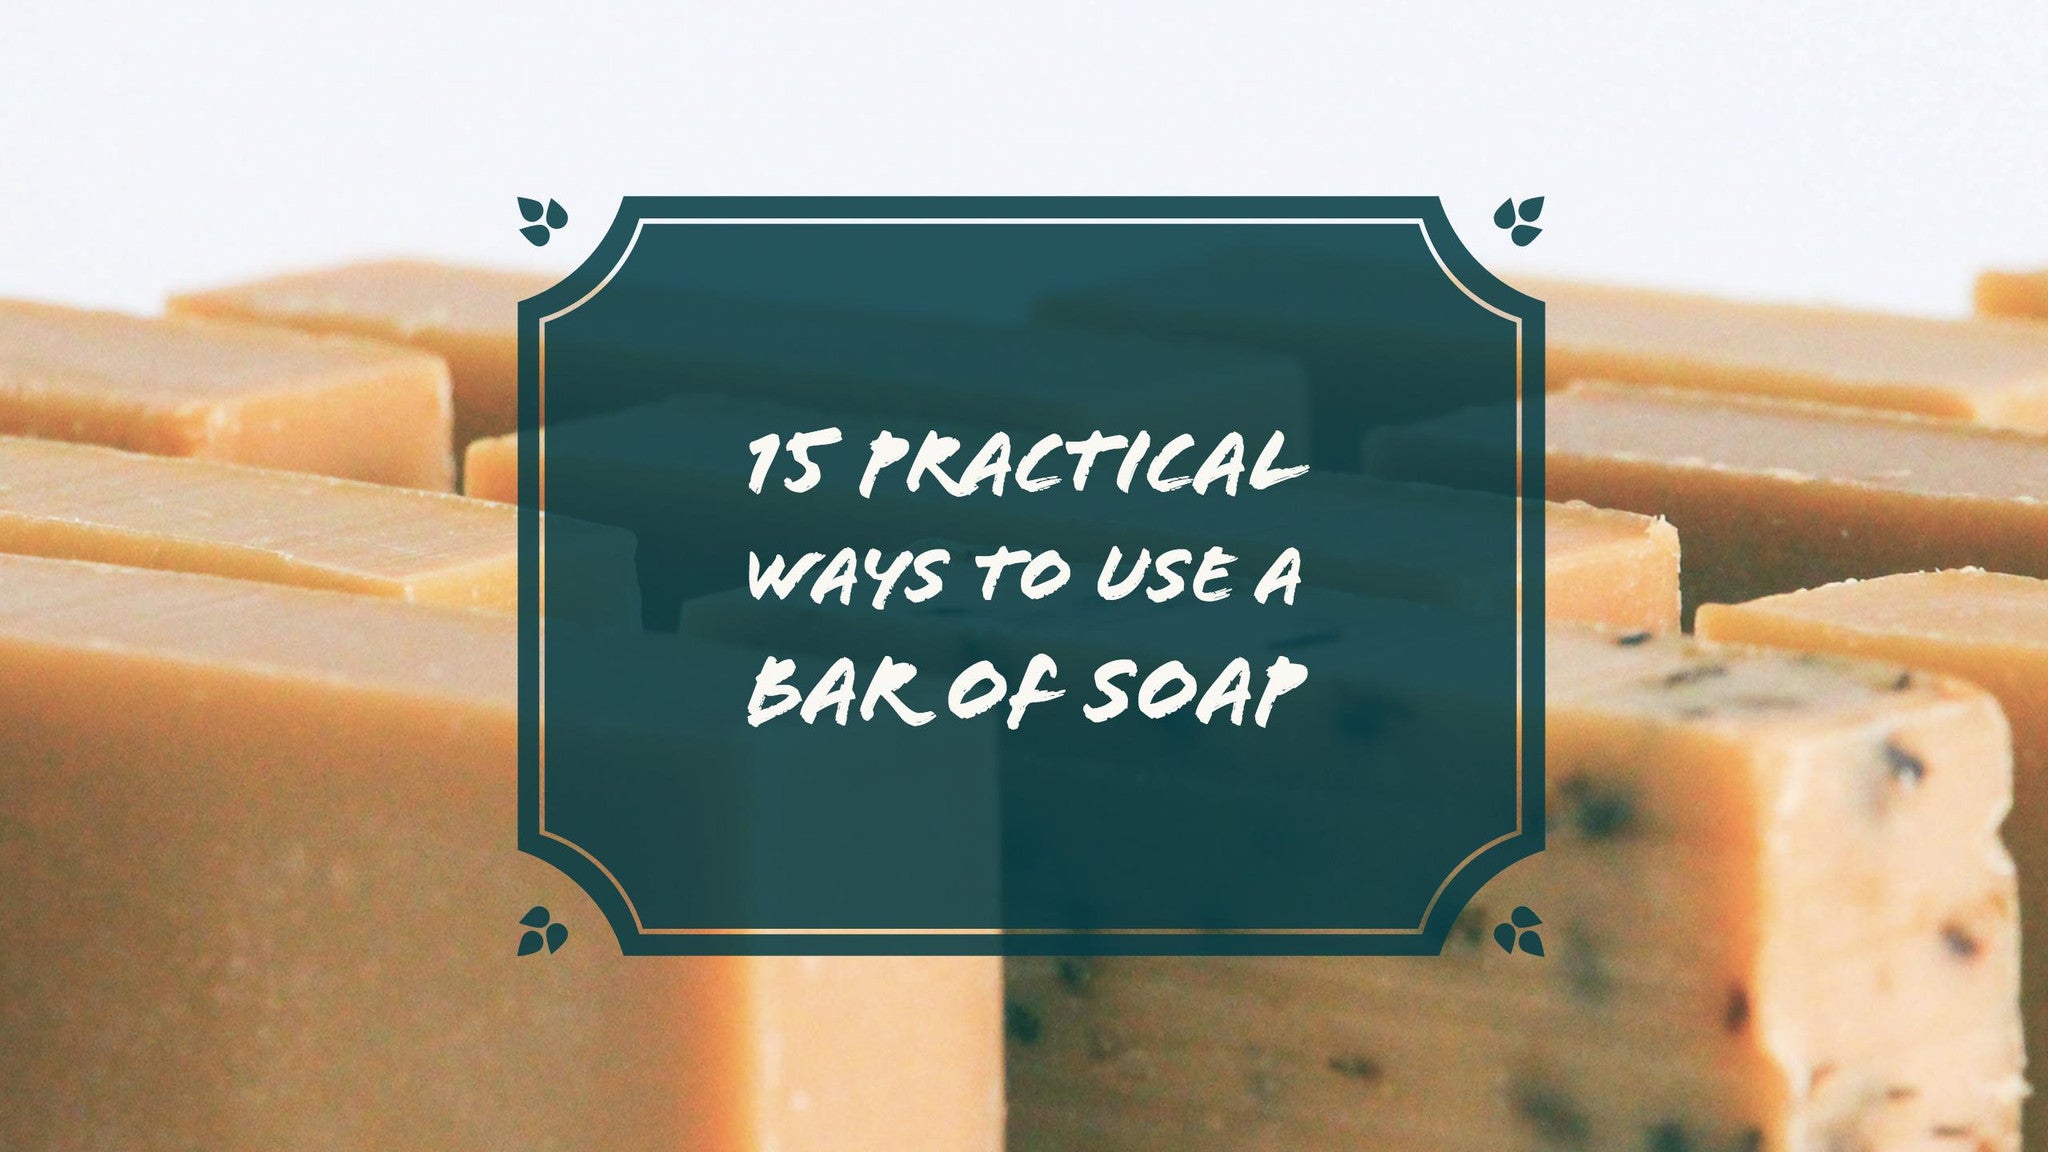 http://www.bendsoap.com/cdn/shop/articles/15_Practical_Ways_to_Use_a_Bar_of_Soap_-_Bend_Soap_Company.jpg?v=1491866529